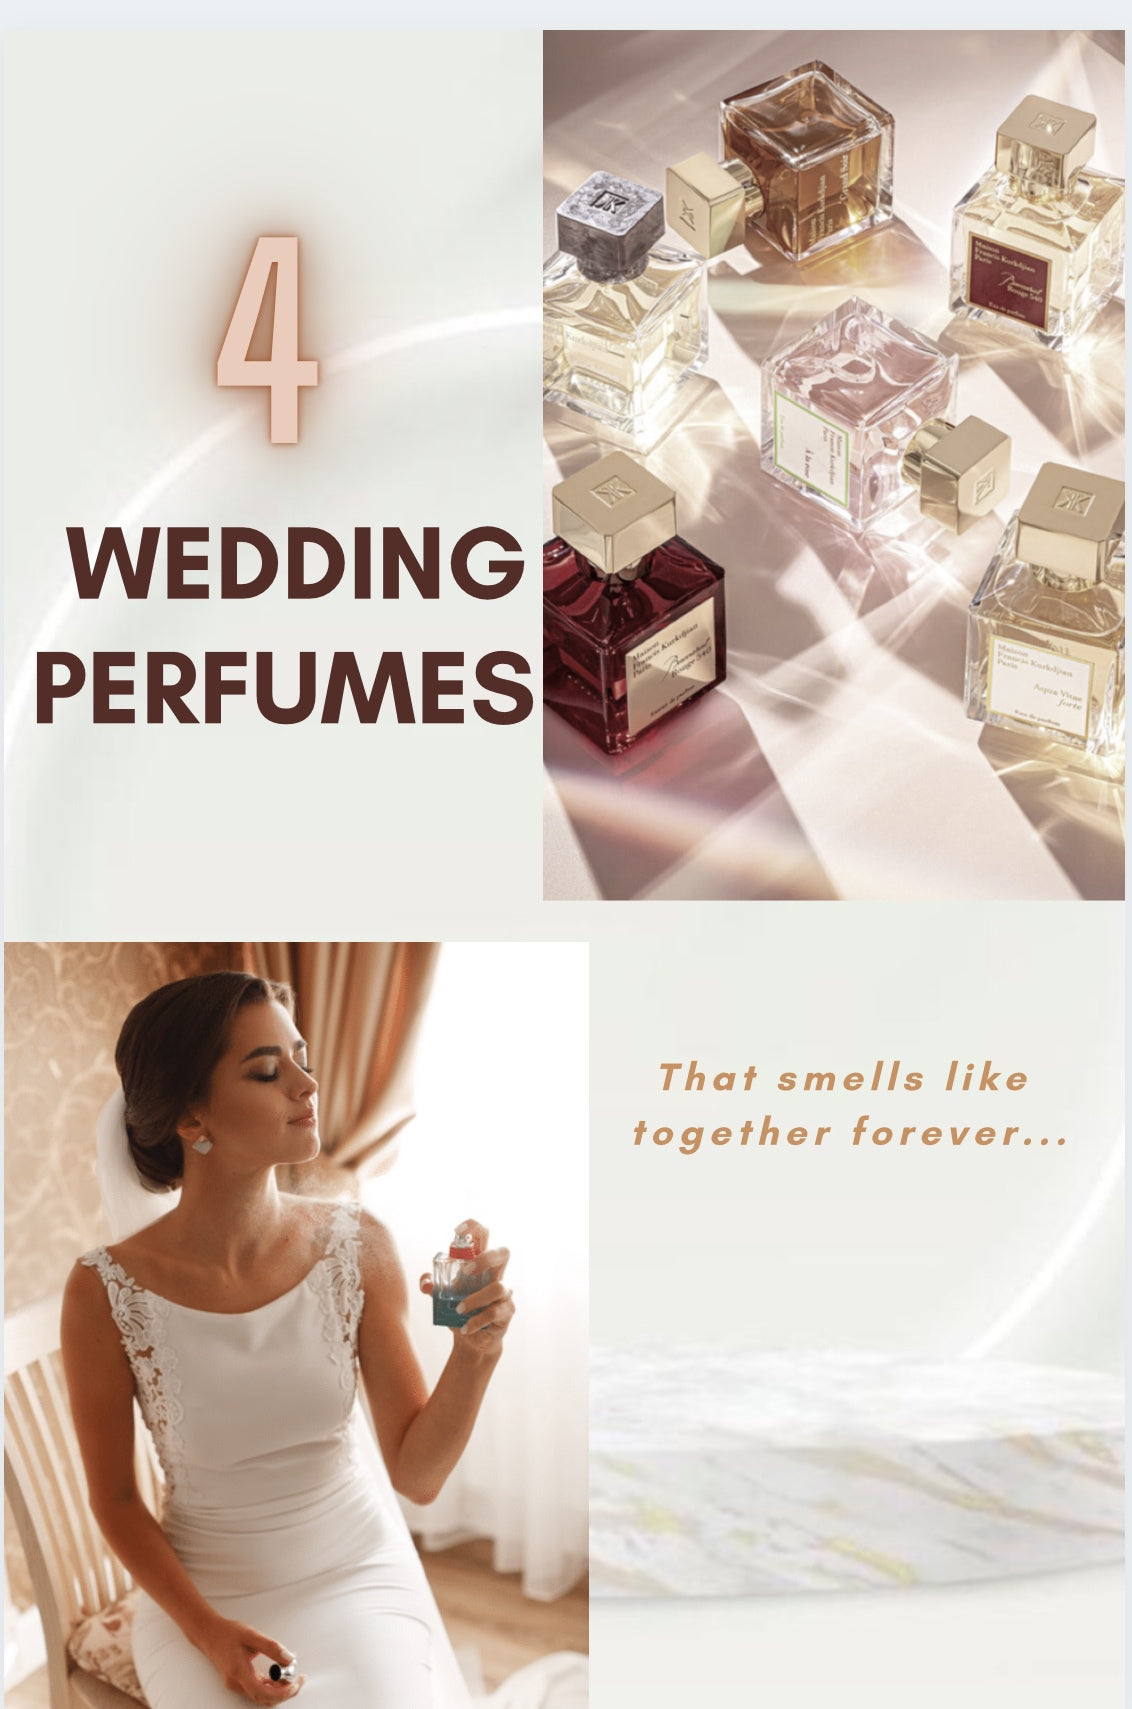 FOR YOUR BIG DAY— 4 WEDDING PERFUMES THAT SMELLS LIKE TOGETHER FOREVER